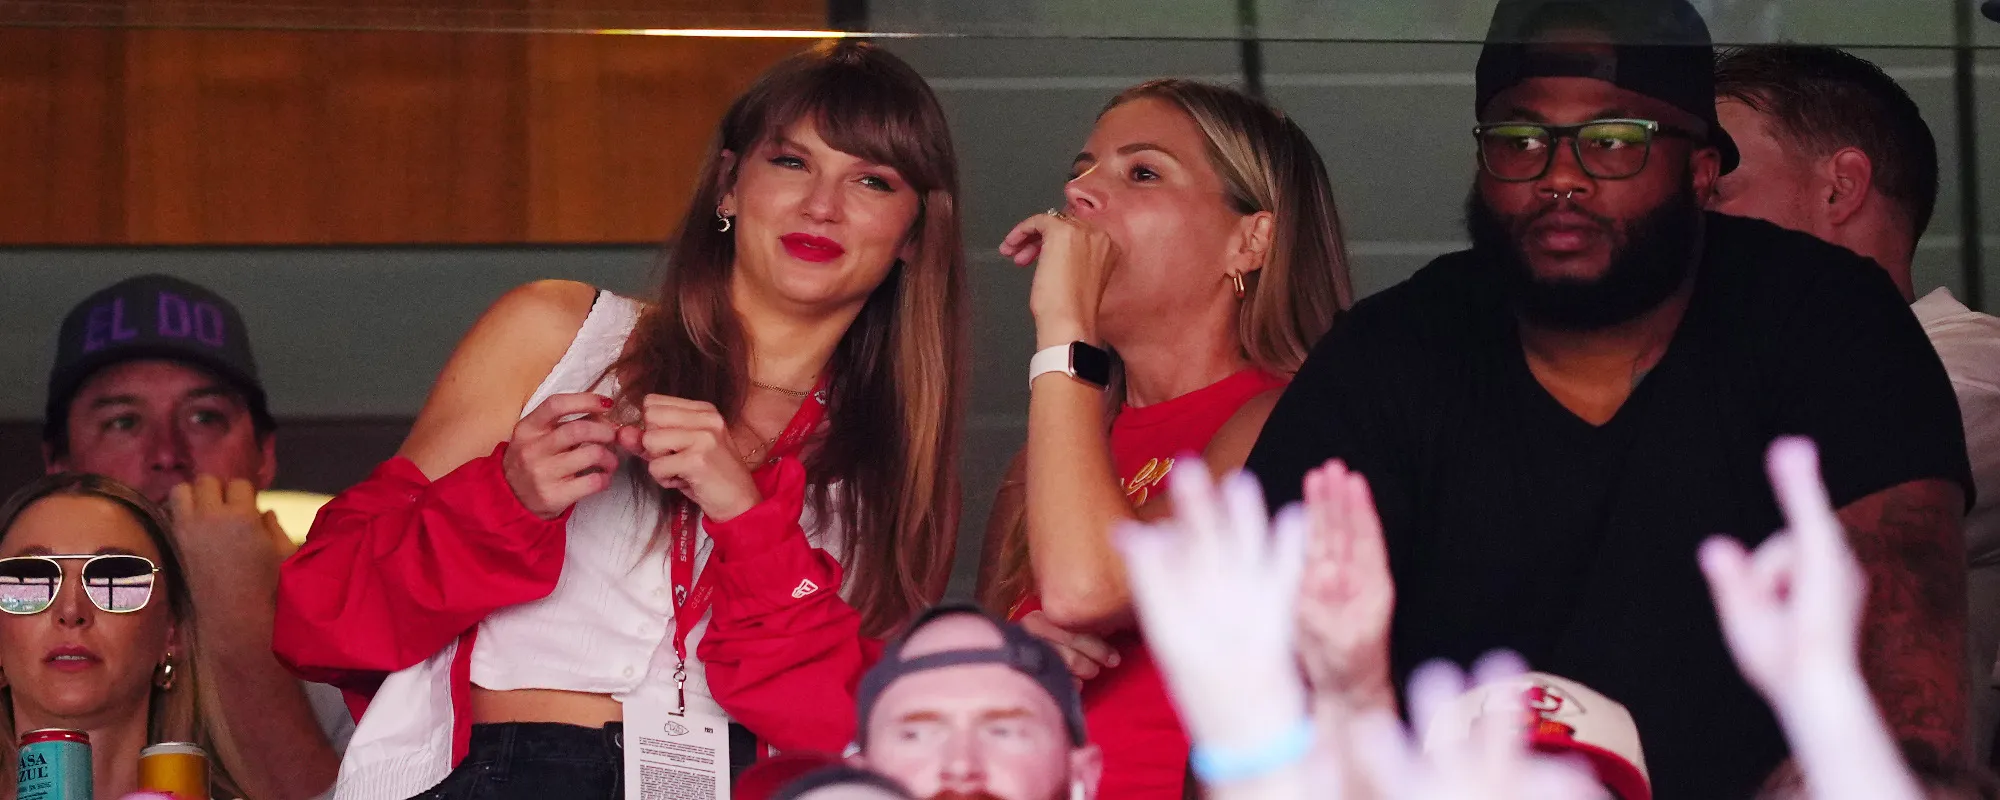 Taylor Swift Was on Another NFL Broadcast — So Was a Shot of “Cornelia St.” Sign